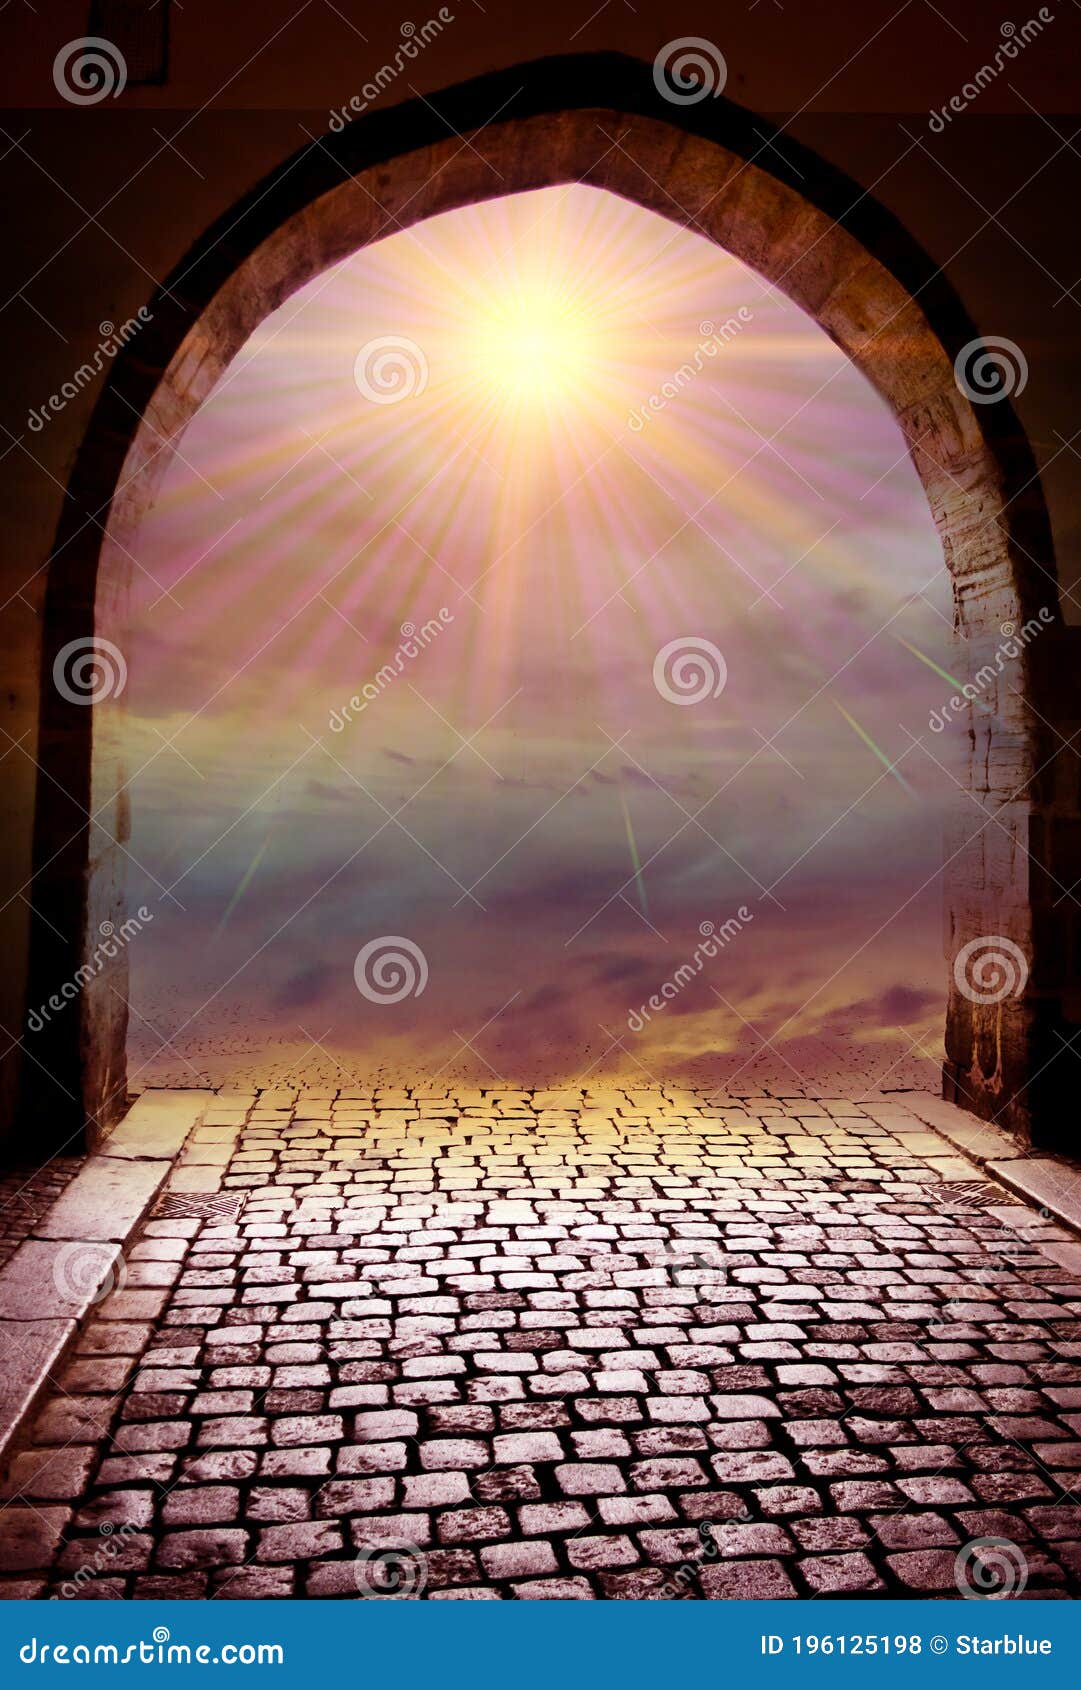 magic gate with divine light and mystic star like spiritual and religious concept